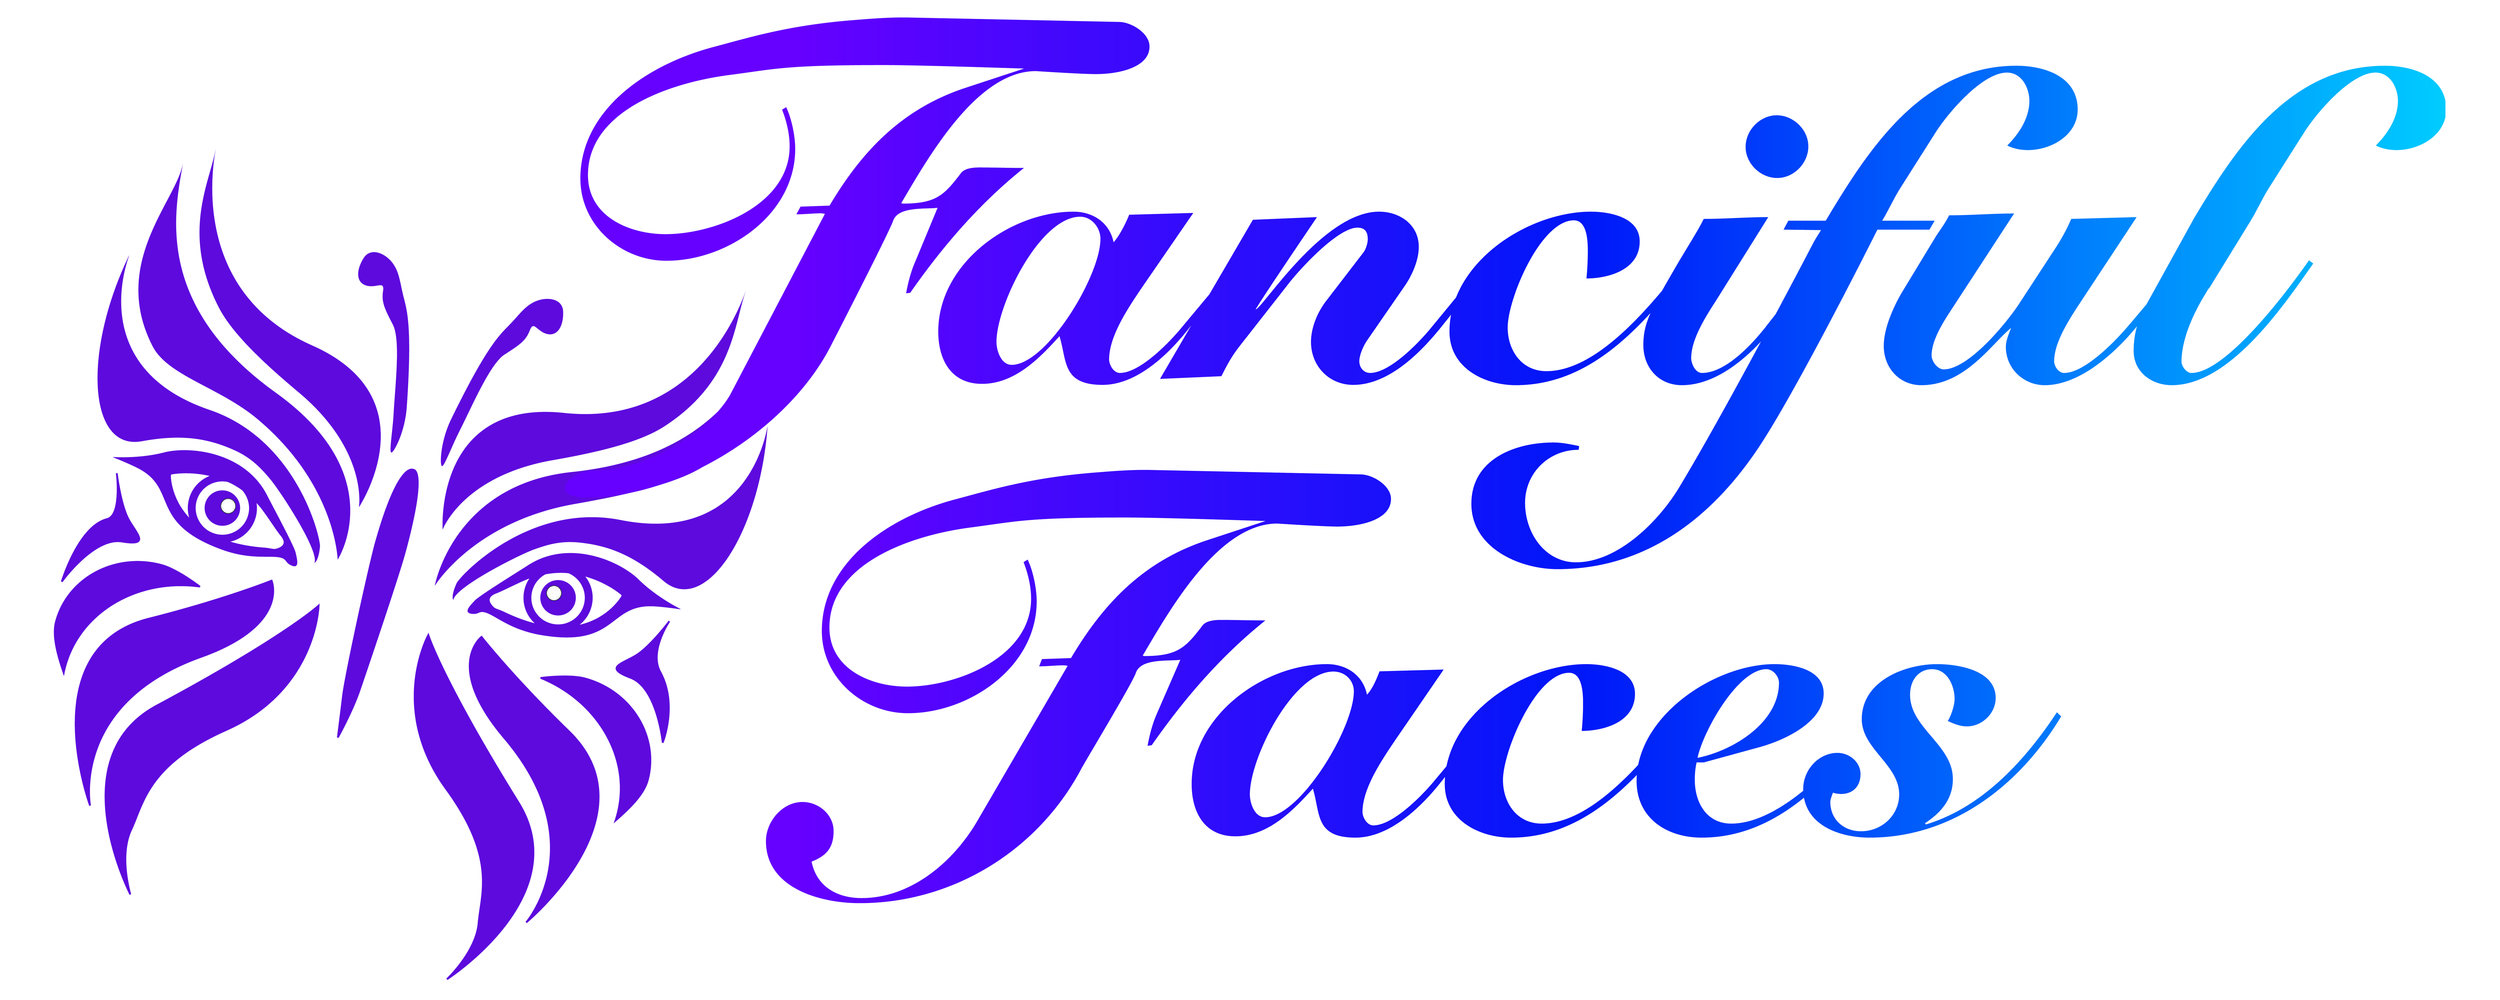 Fanciful Faces